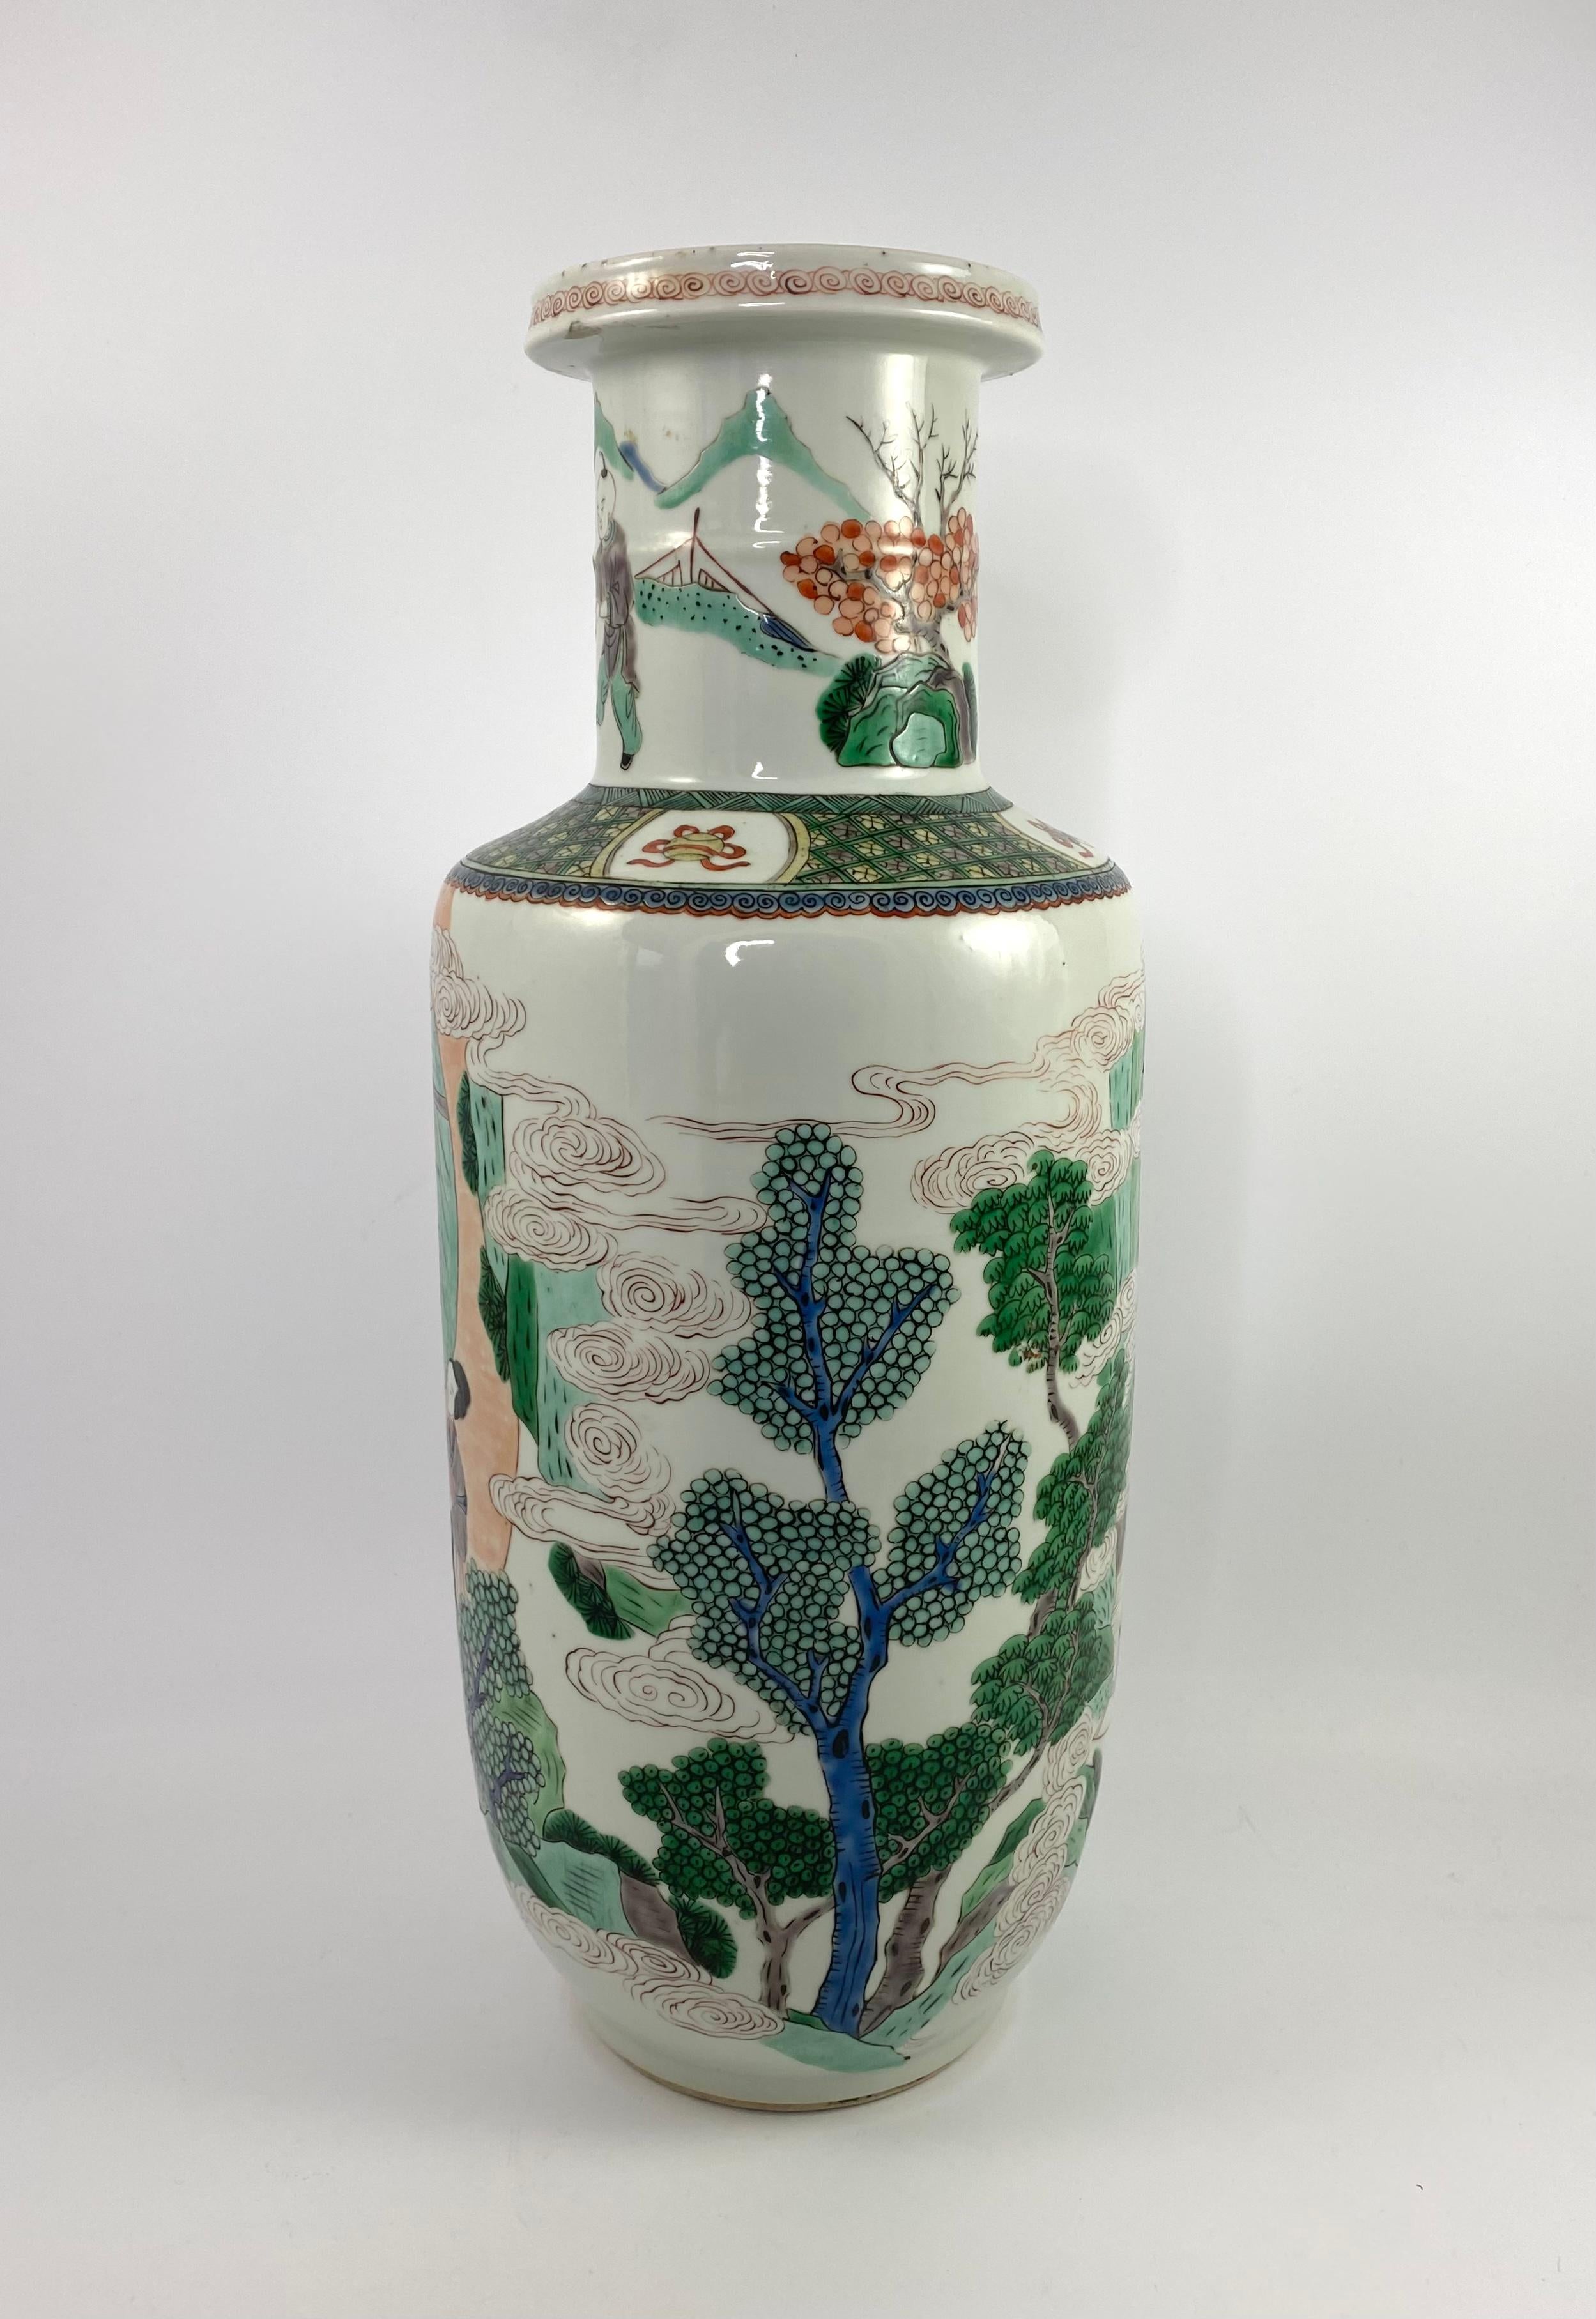 19th Century Chinese Porcelain Rolleau Vase, 19th C. Qing Dynasty